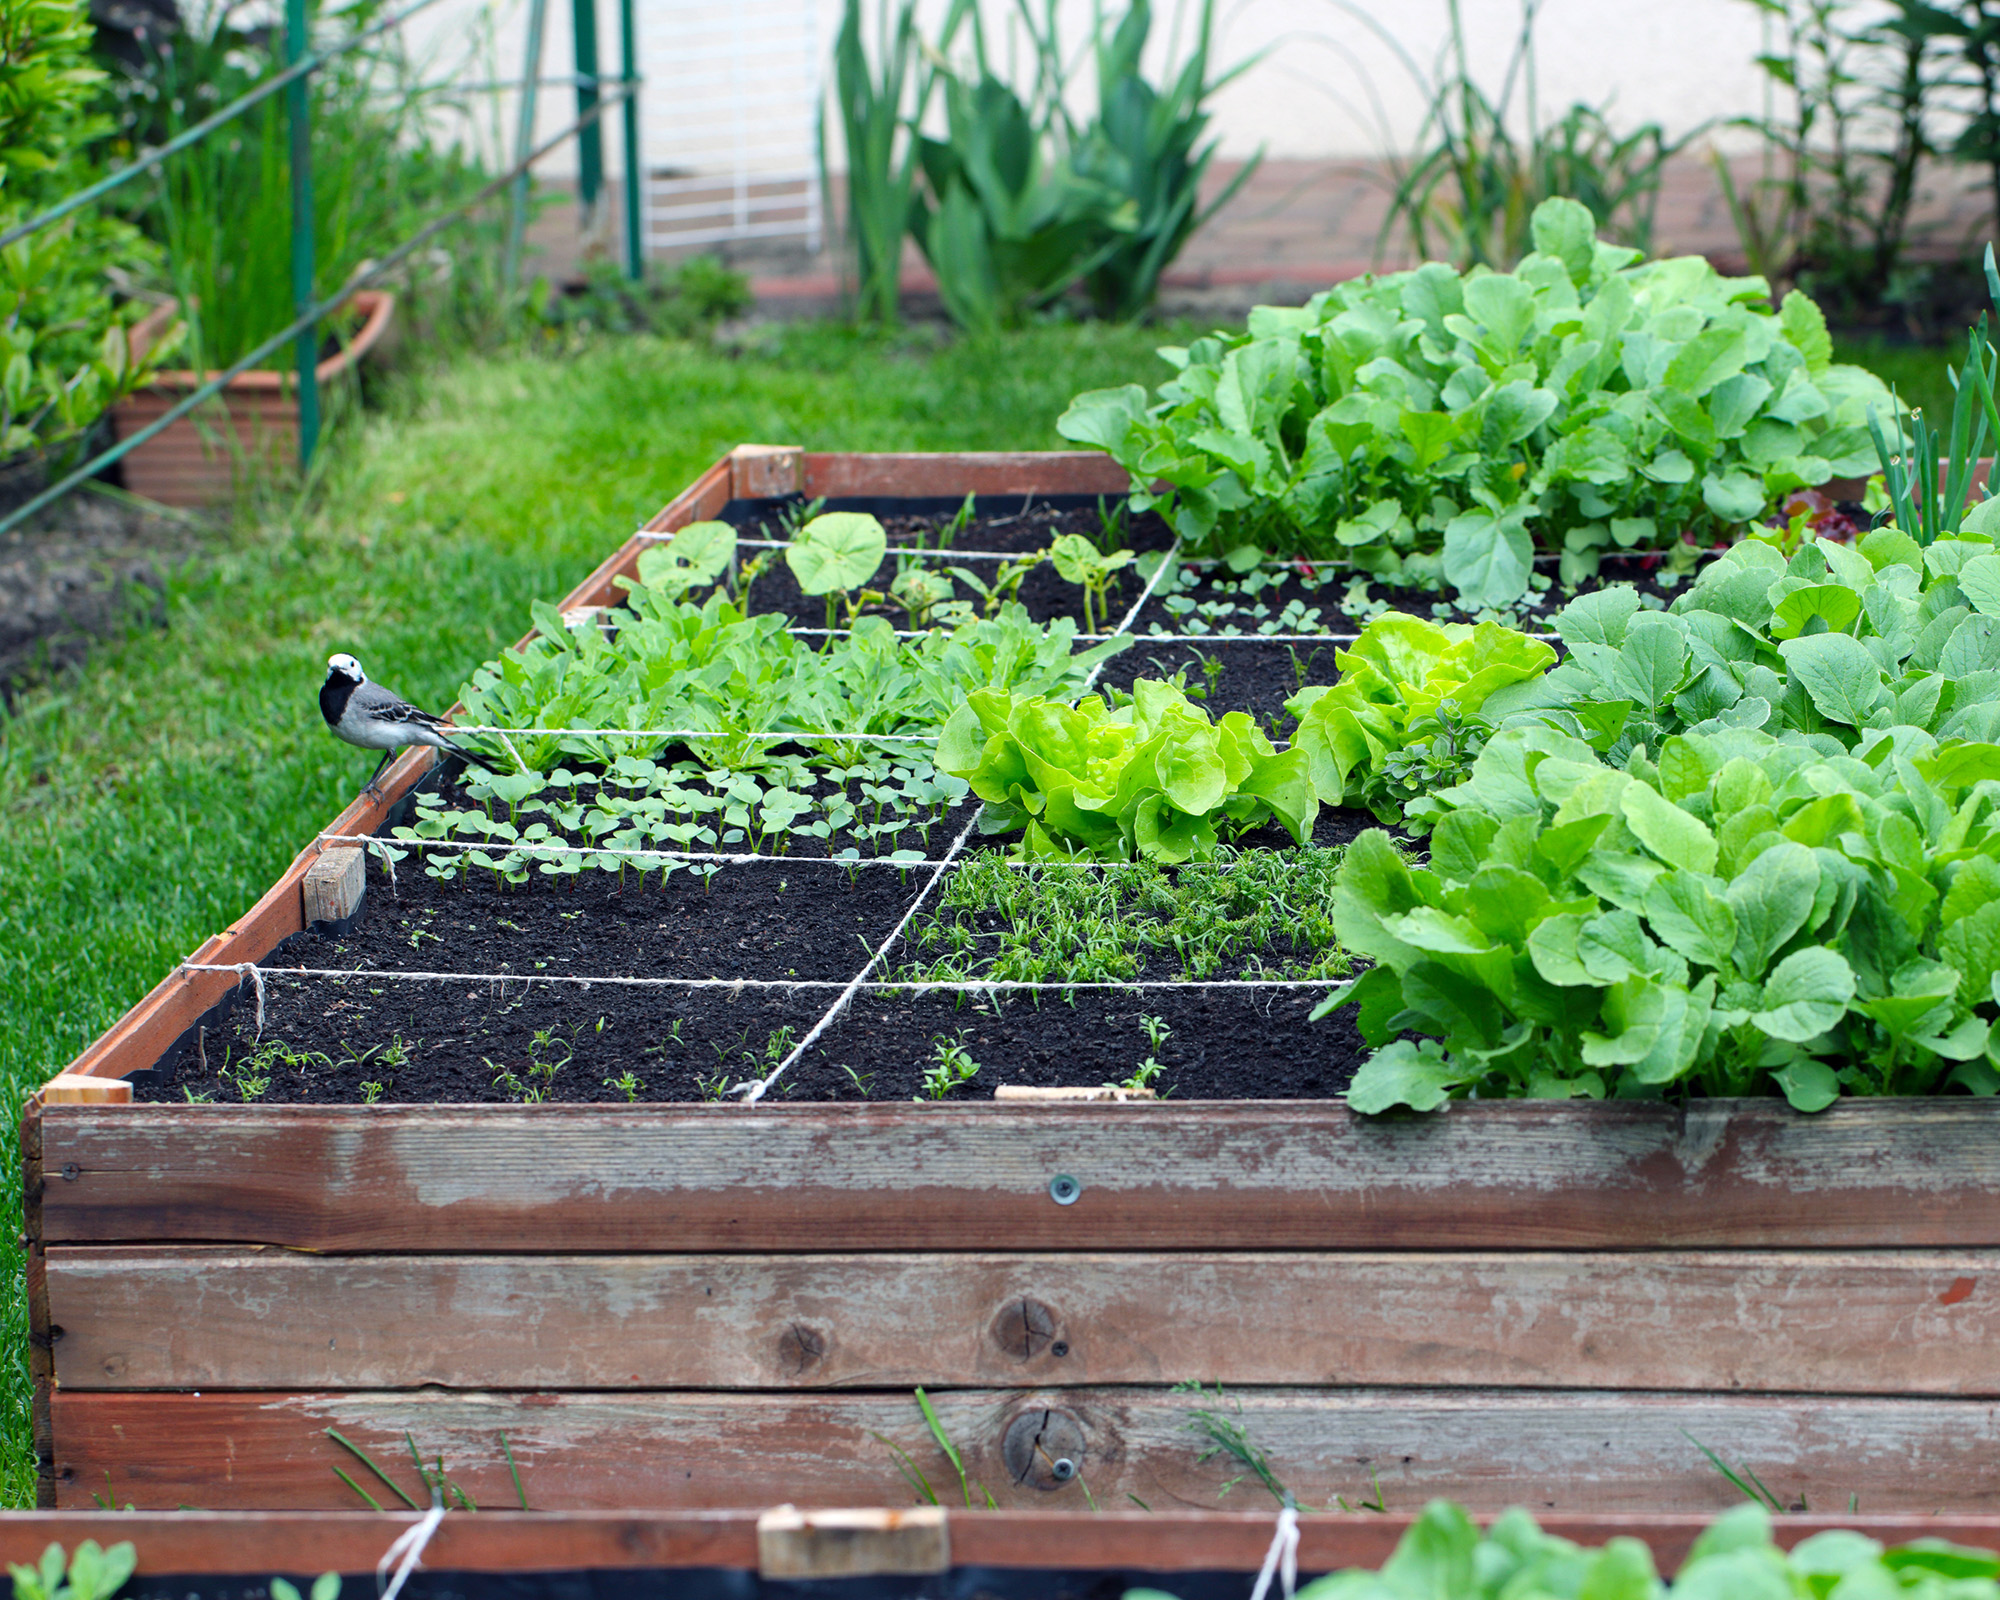 Raised bed divided into square foot grid system, growing leafy vegetables